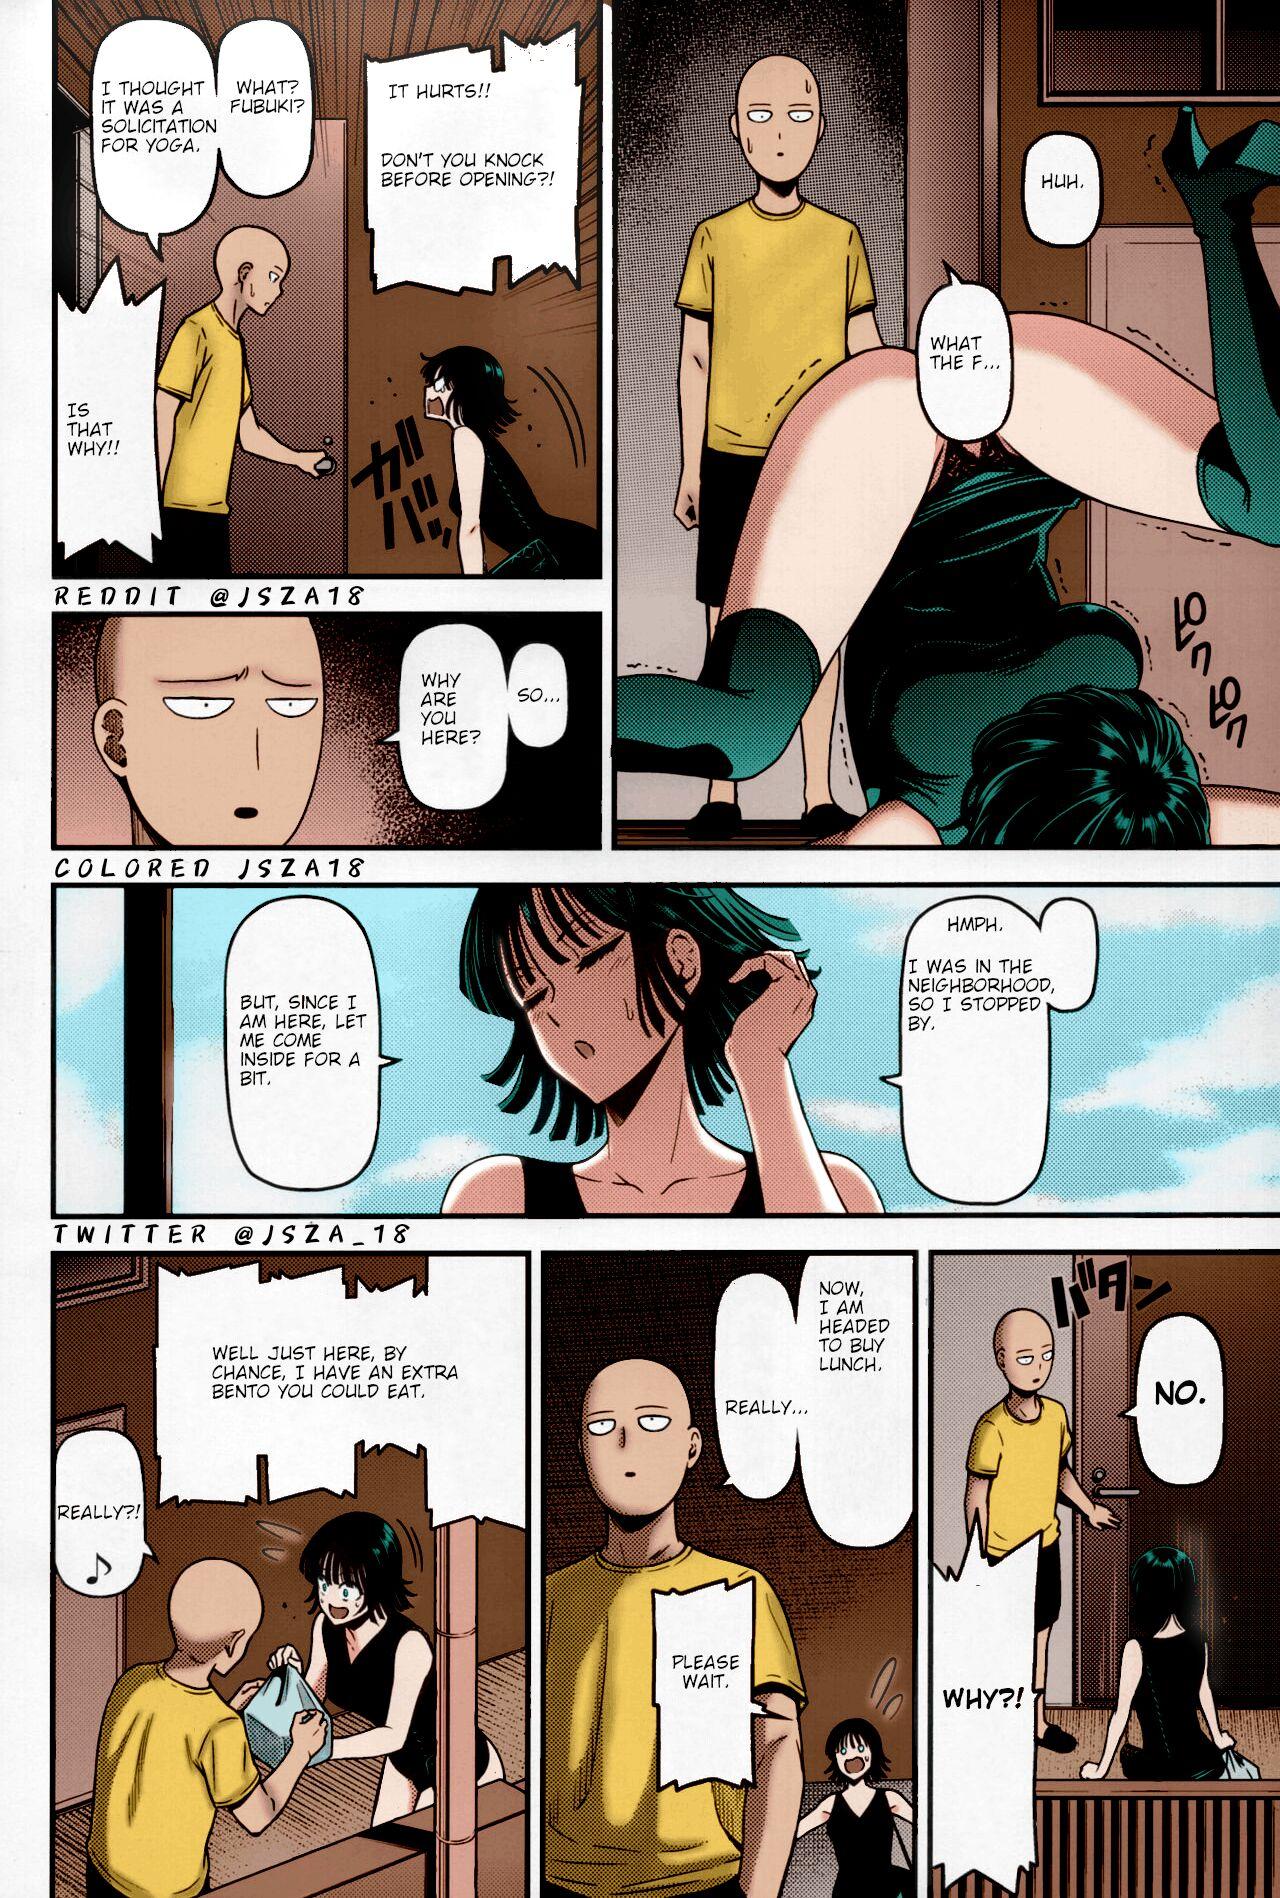 Latinos ONE-HURRICANE 6 - One punch man Cock Suck - Page 3